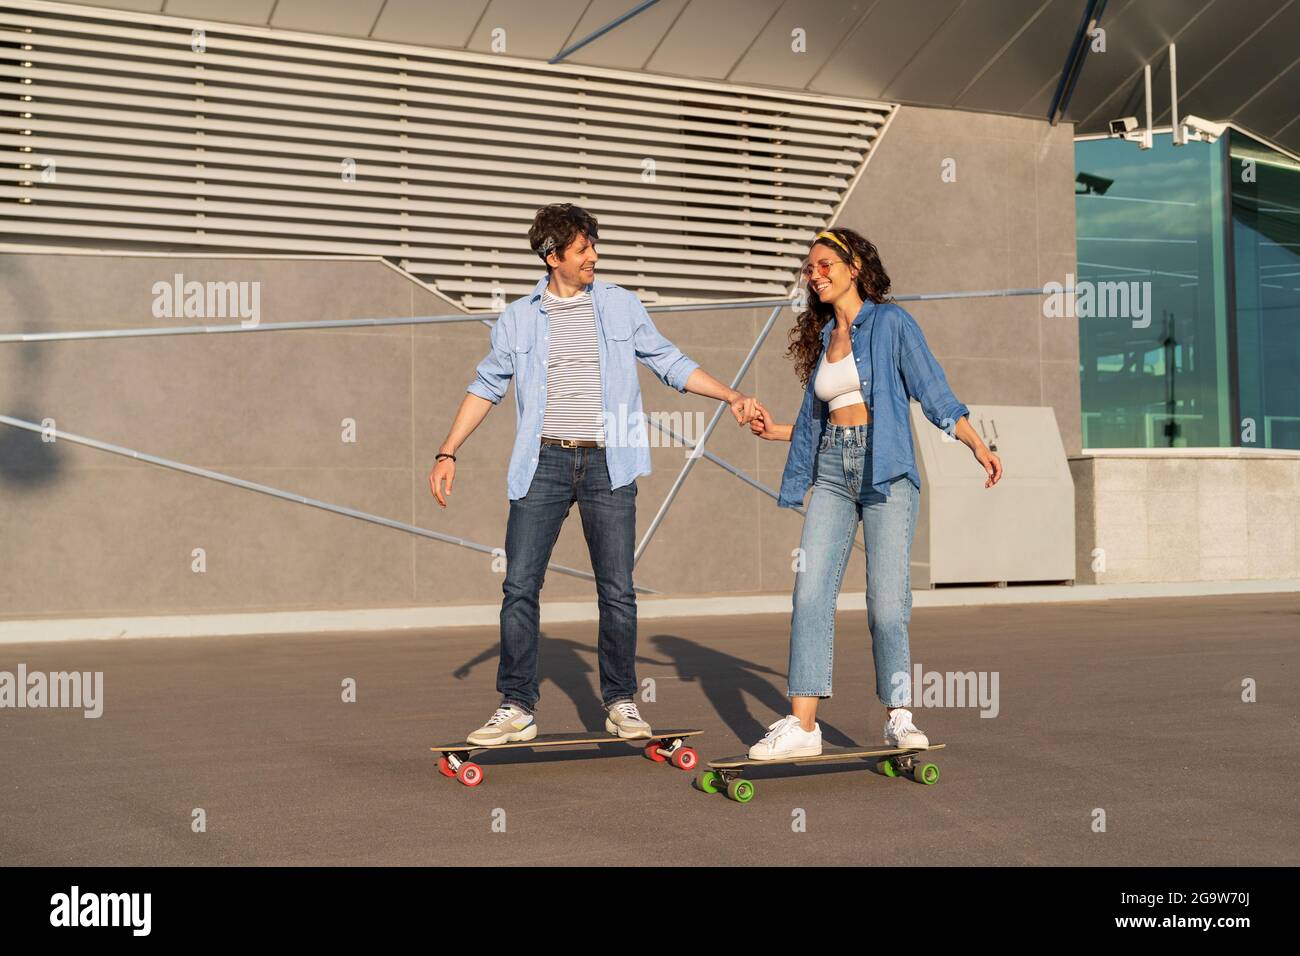 Trendy young couple skating on longboard together. Stylish man and woman longboarding in summer city Stock Photo